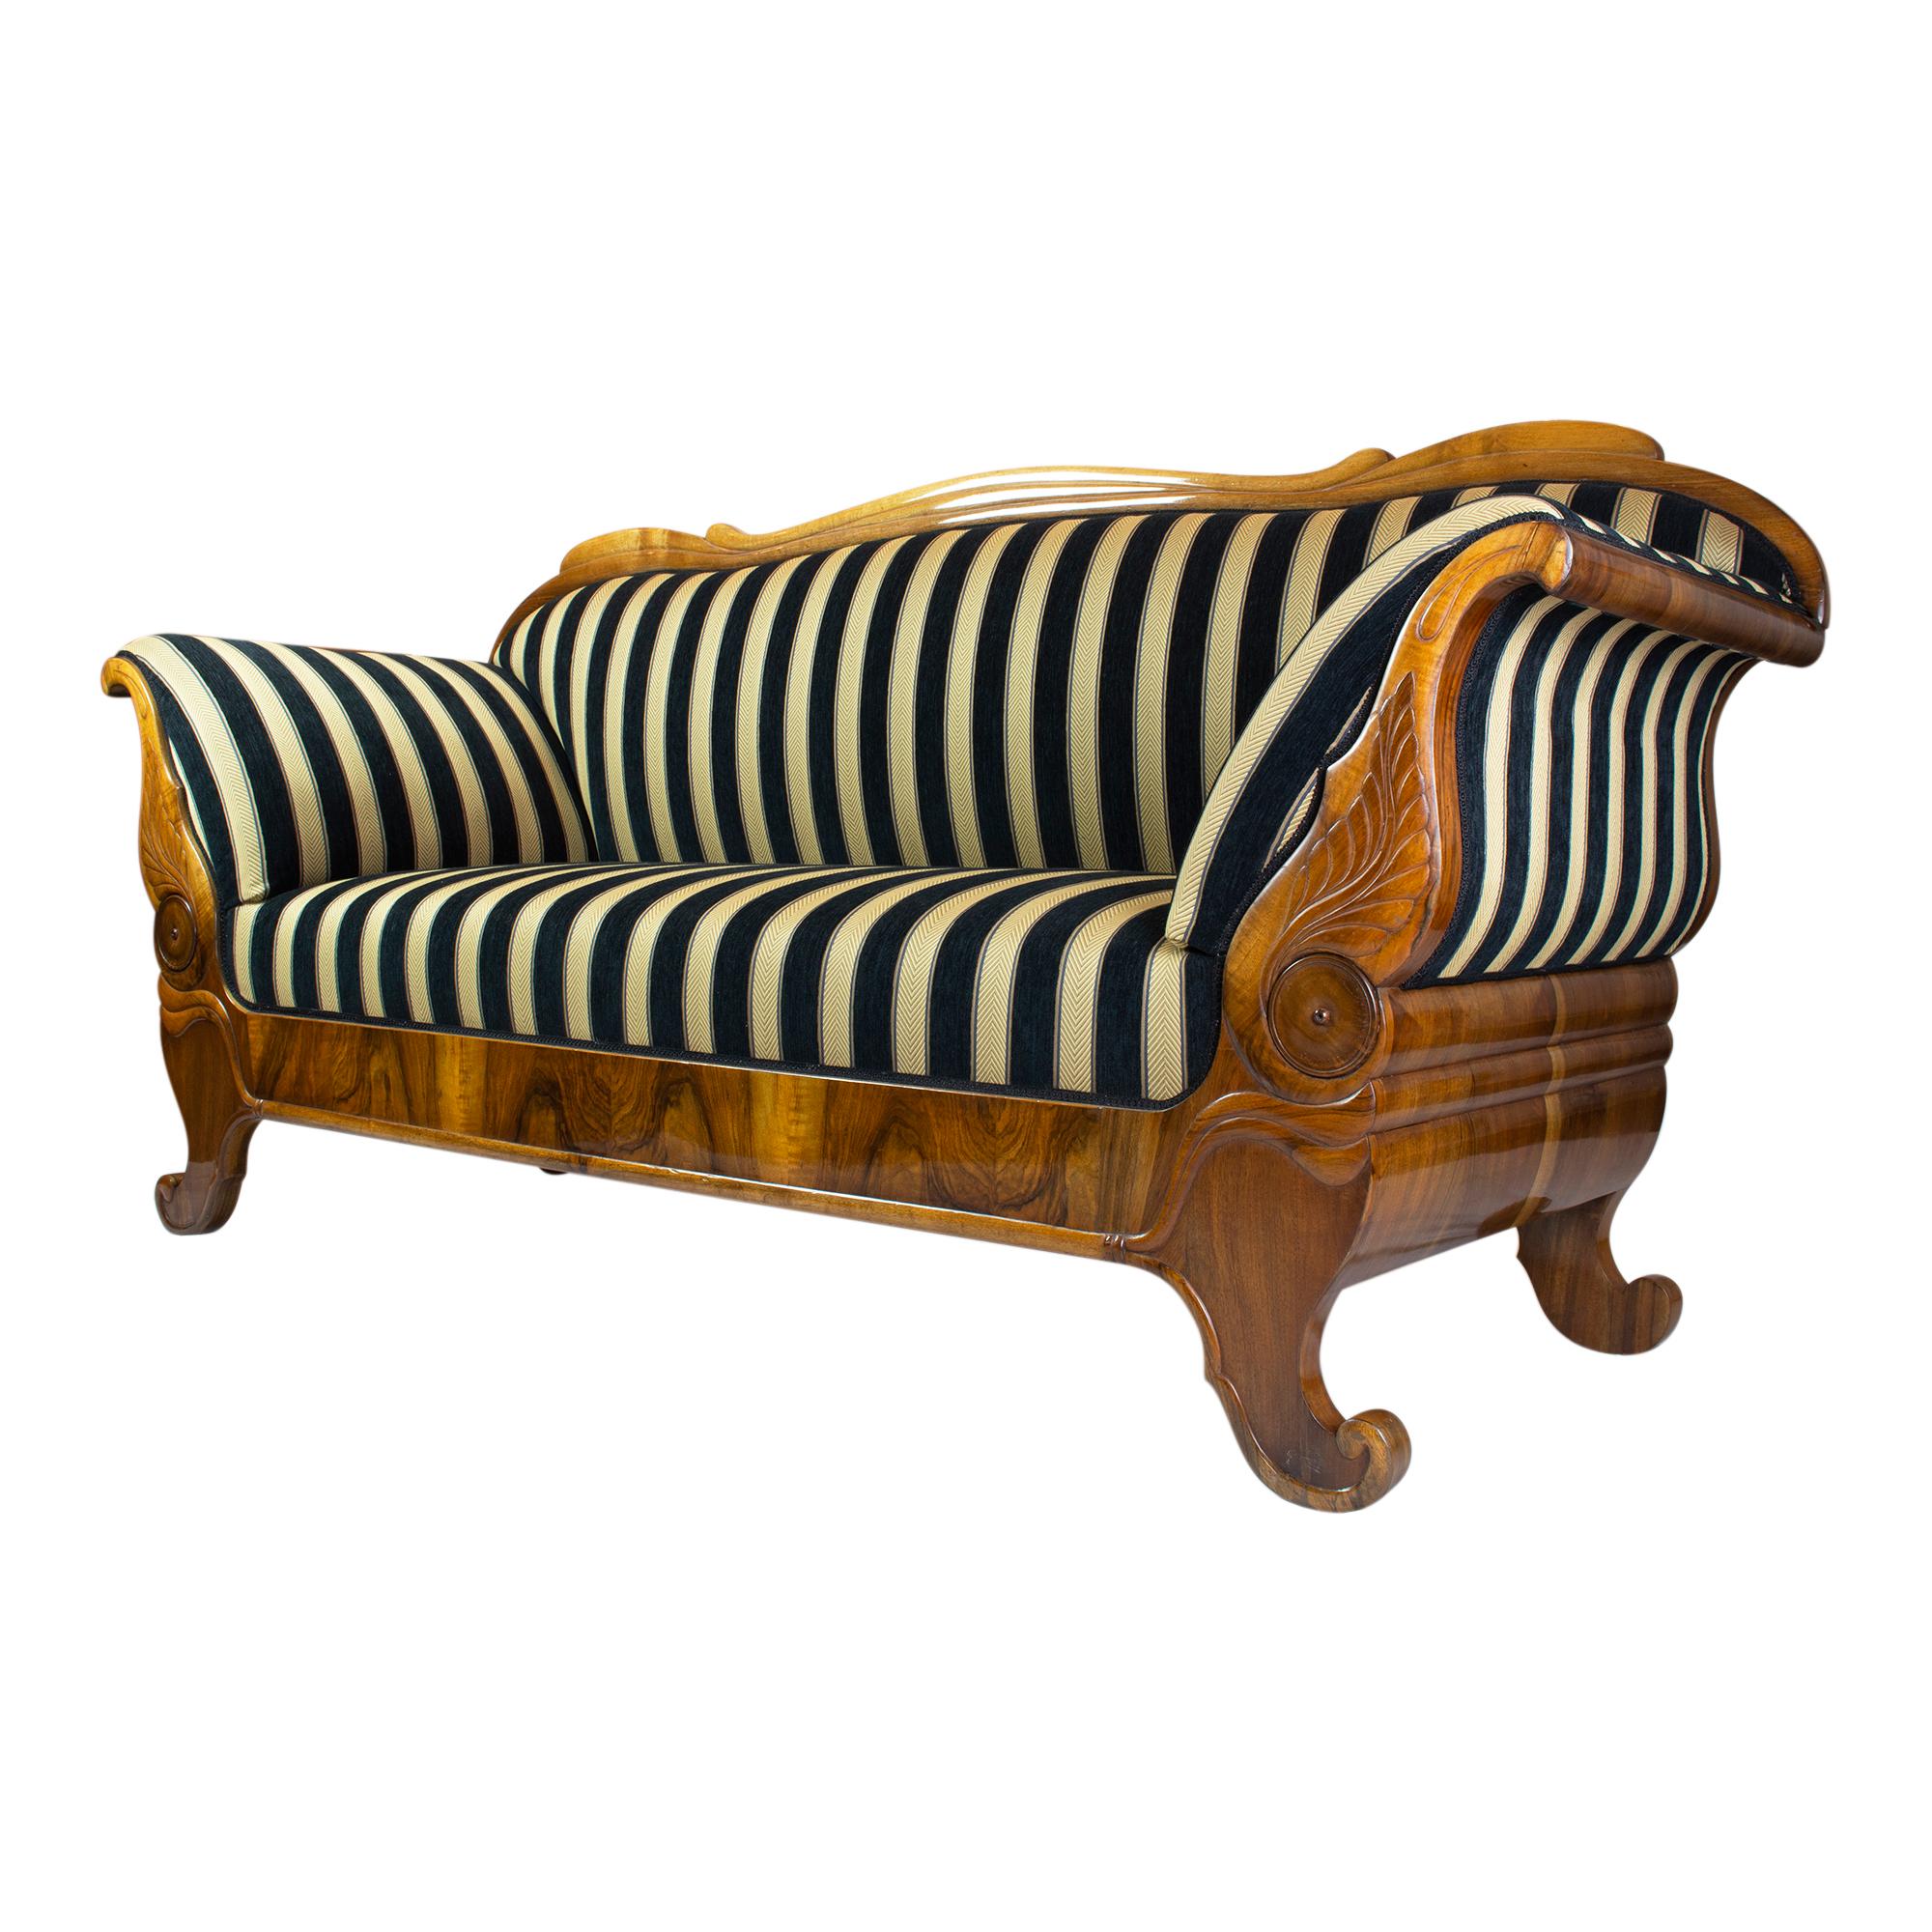 The Biedermeier sofa, dating back to around 1825, is a true classic piece of furniture. Made from beautiful walnut wood, it has been hand polished with shellac to achieve a stunning finish. Recently reupholstered with new Biedermeier fabric, it